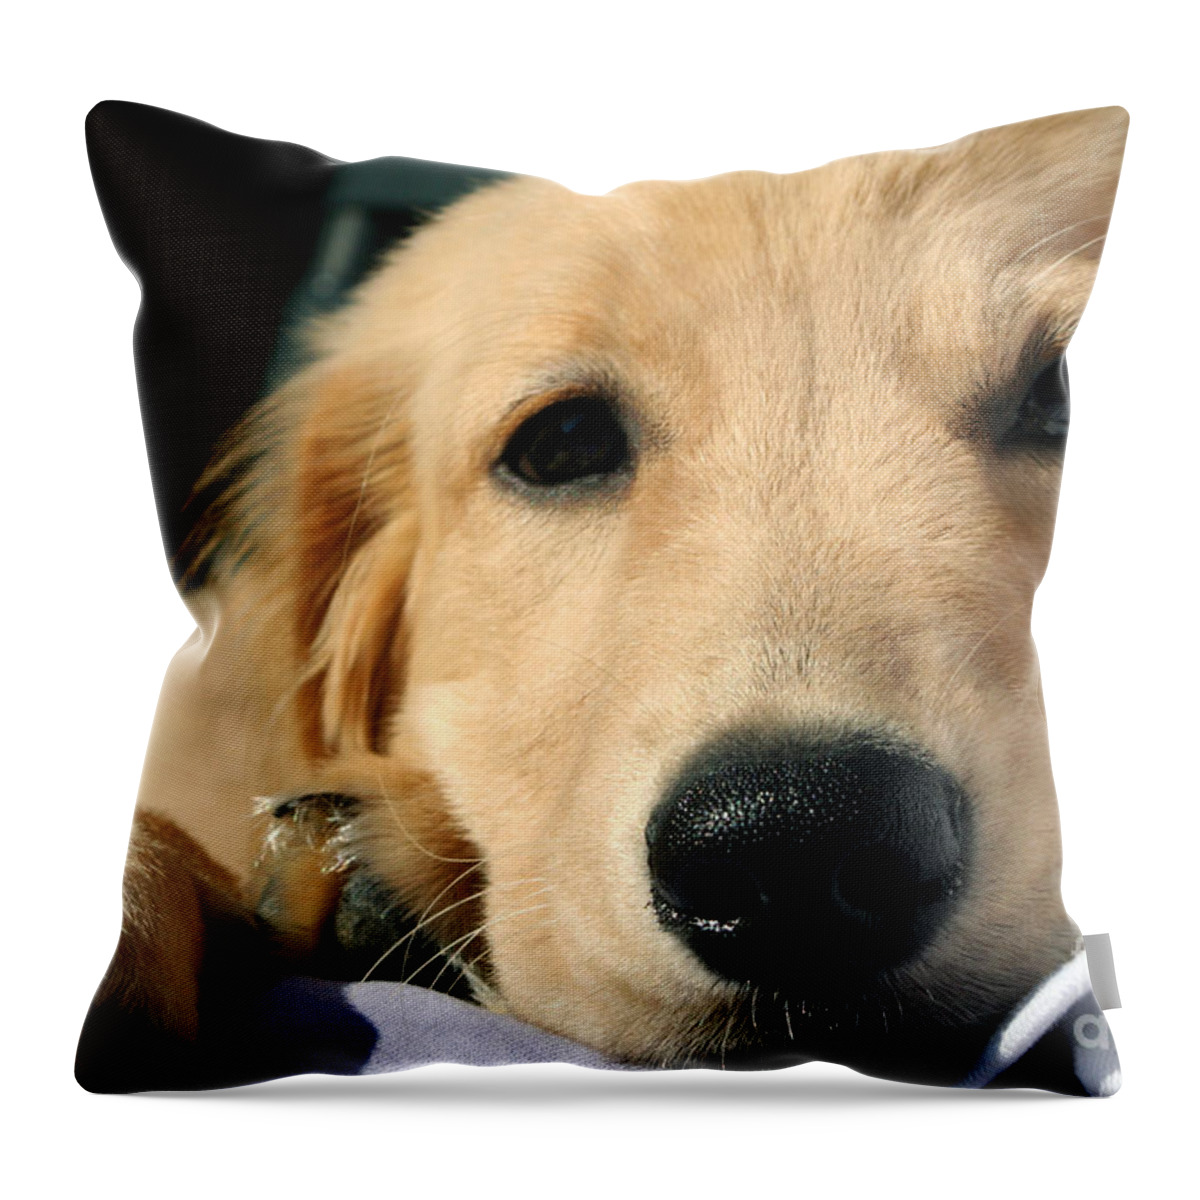 Adorable Throw Pillow featuring the photograph Cuddly Puppy by Susan Stevenson